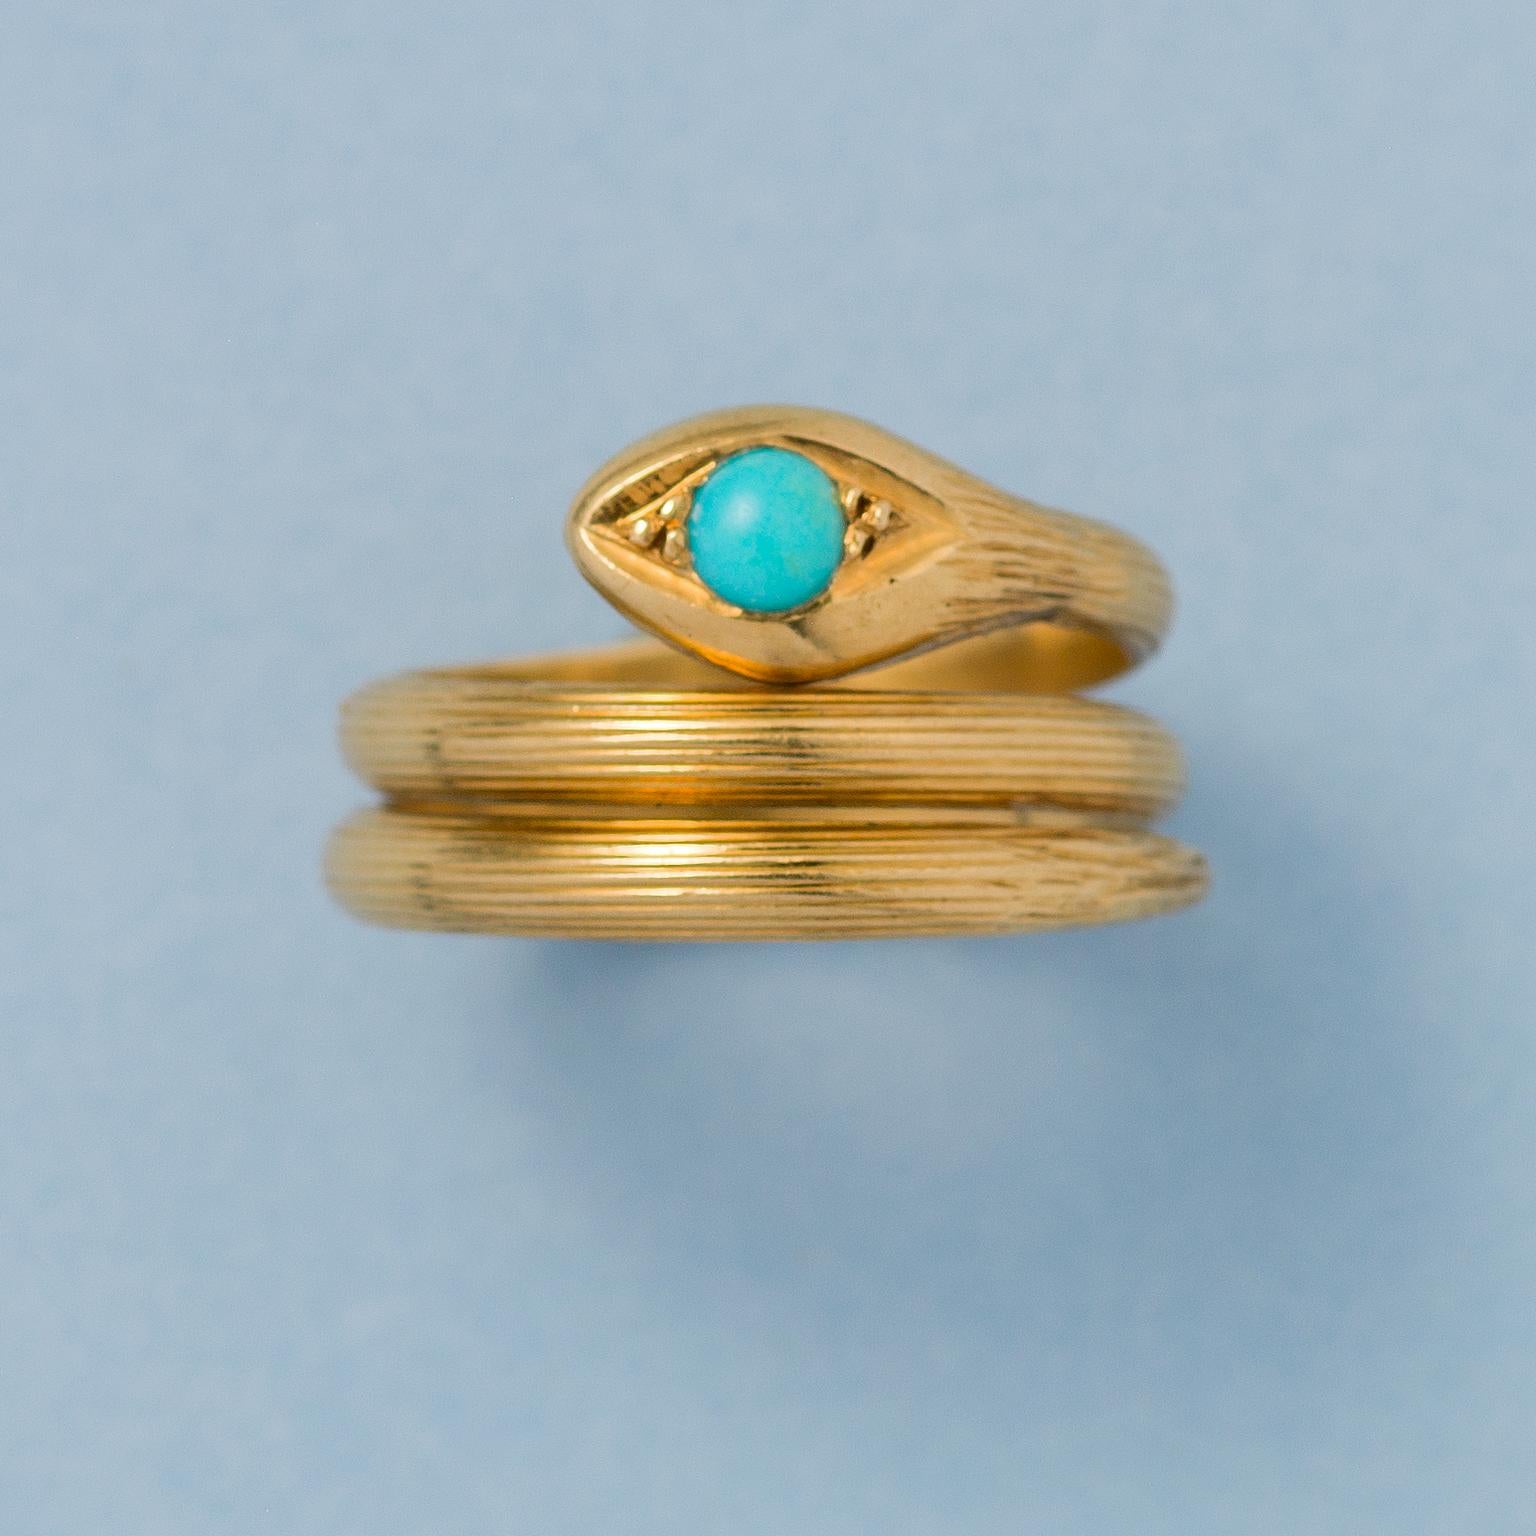 Edwardian 18 Carat Gold French Snake Ring with Turquoise